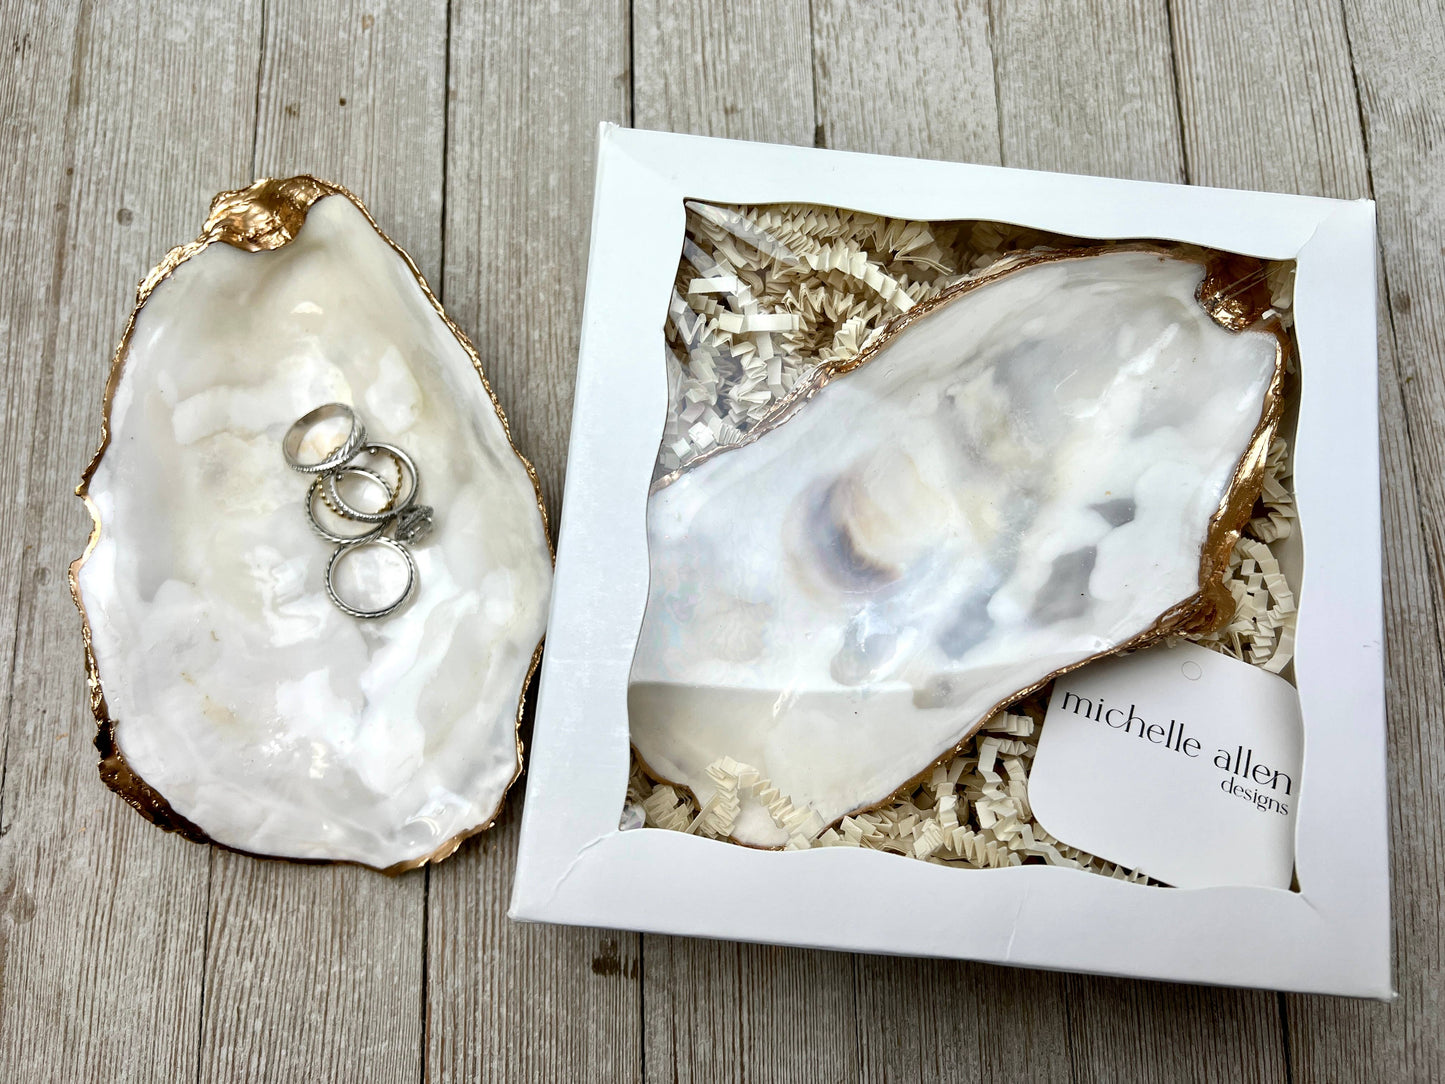 Michelle Allen Designs - Large Oyster Shell Ring Dish